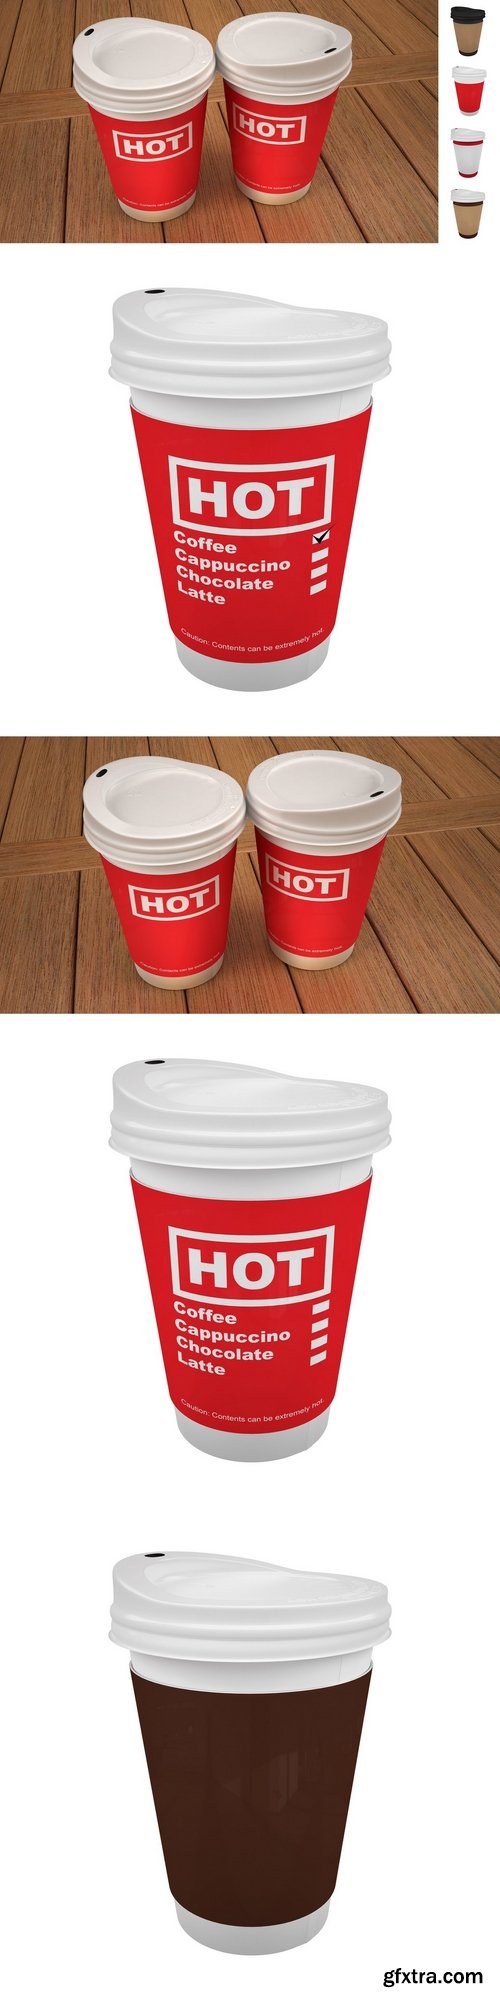 Disposable cup